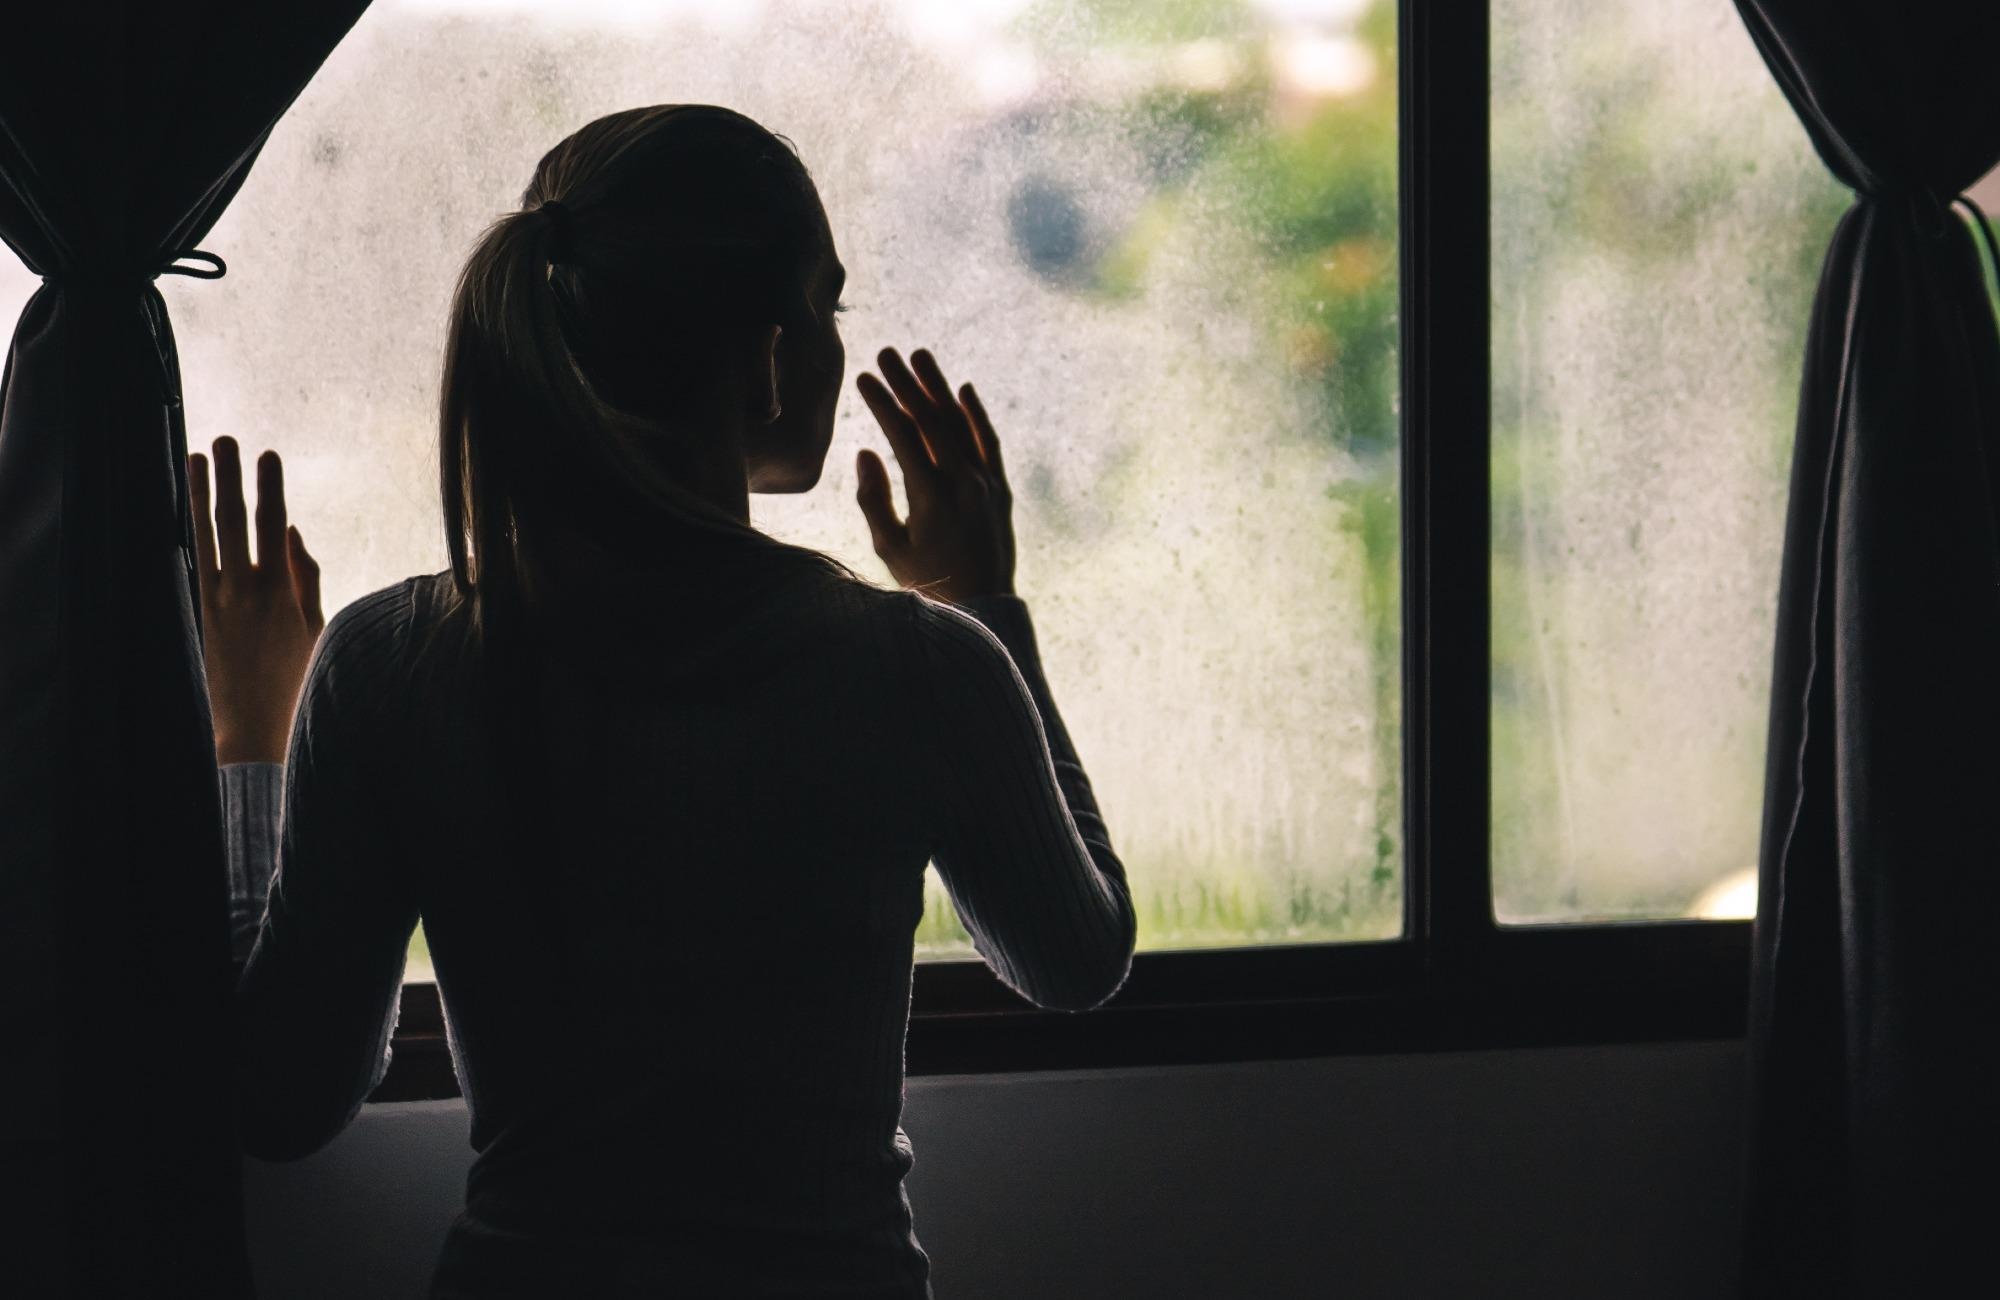 Study: Mental health concerns during the COVID-19 pandemic as revealed by helpline calls. Image Credit: engagestock/Shutterstock.com